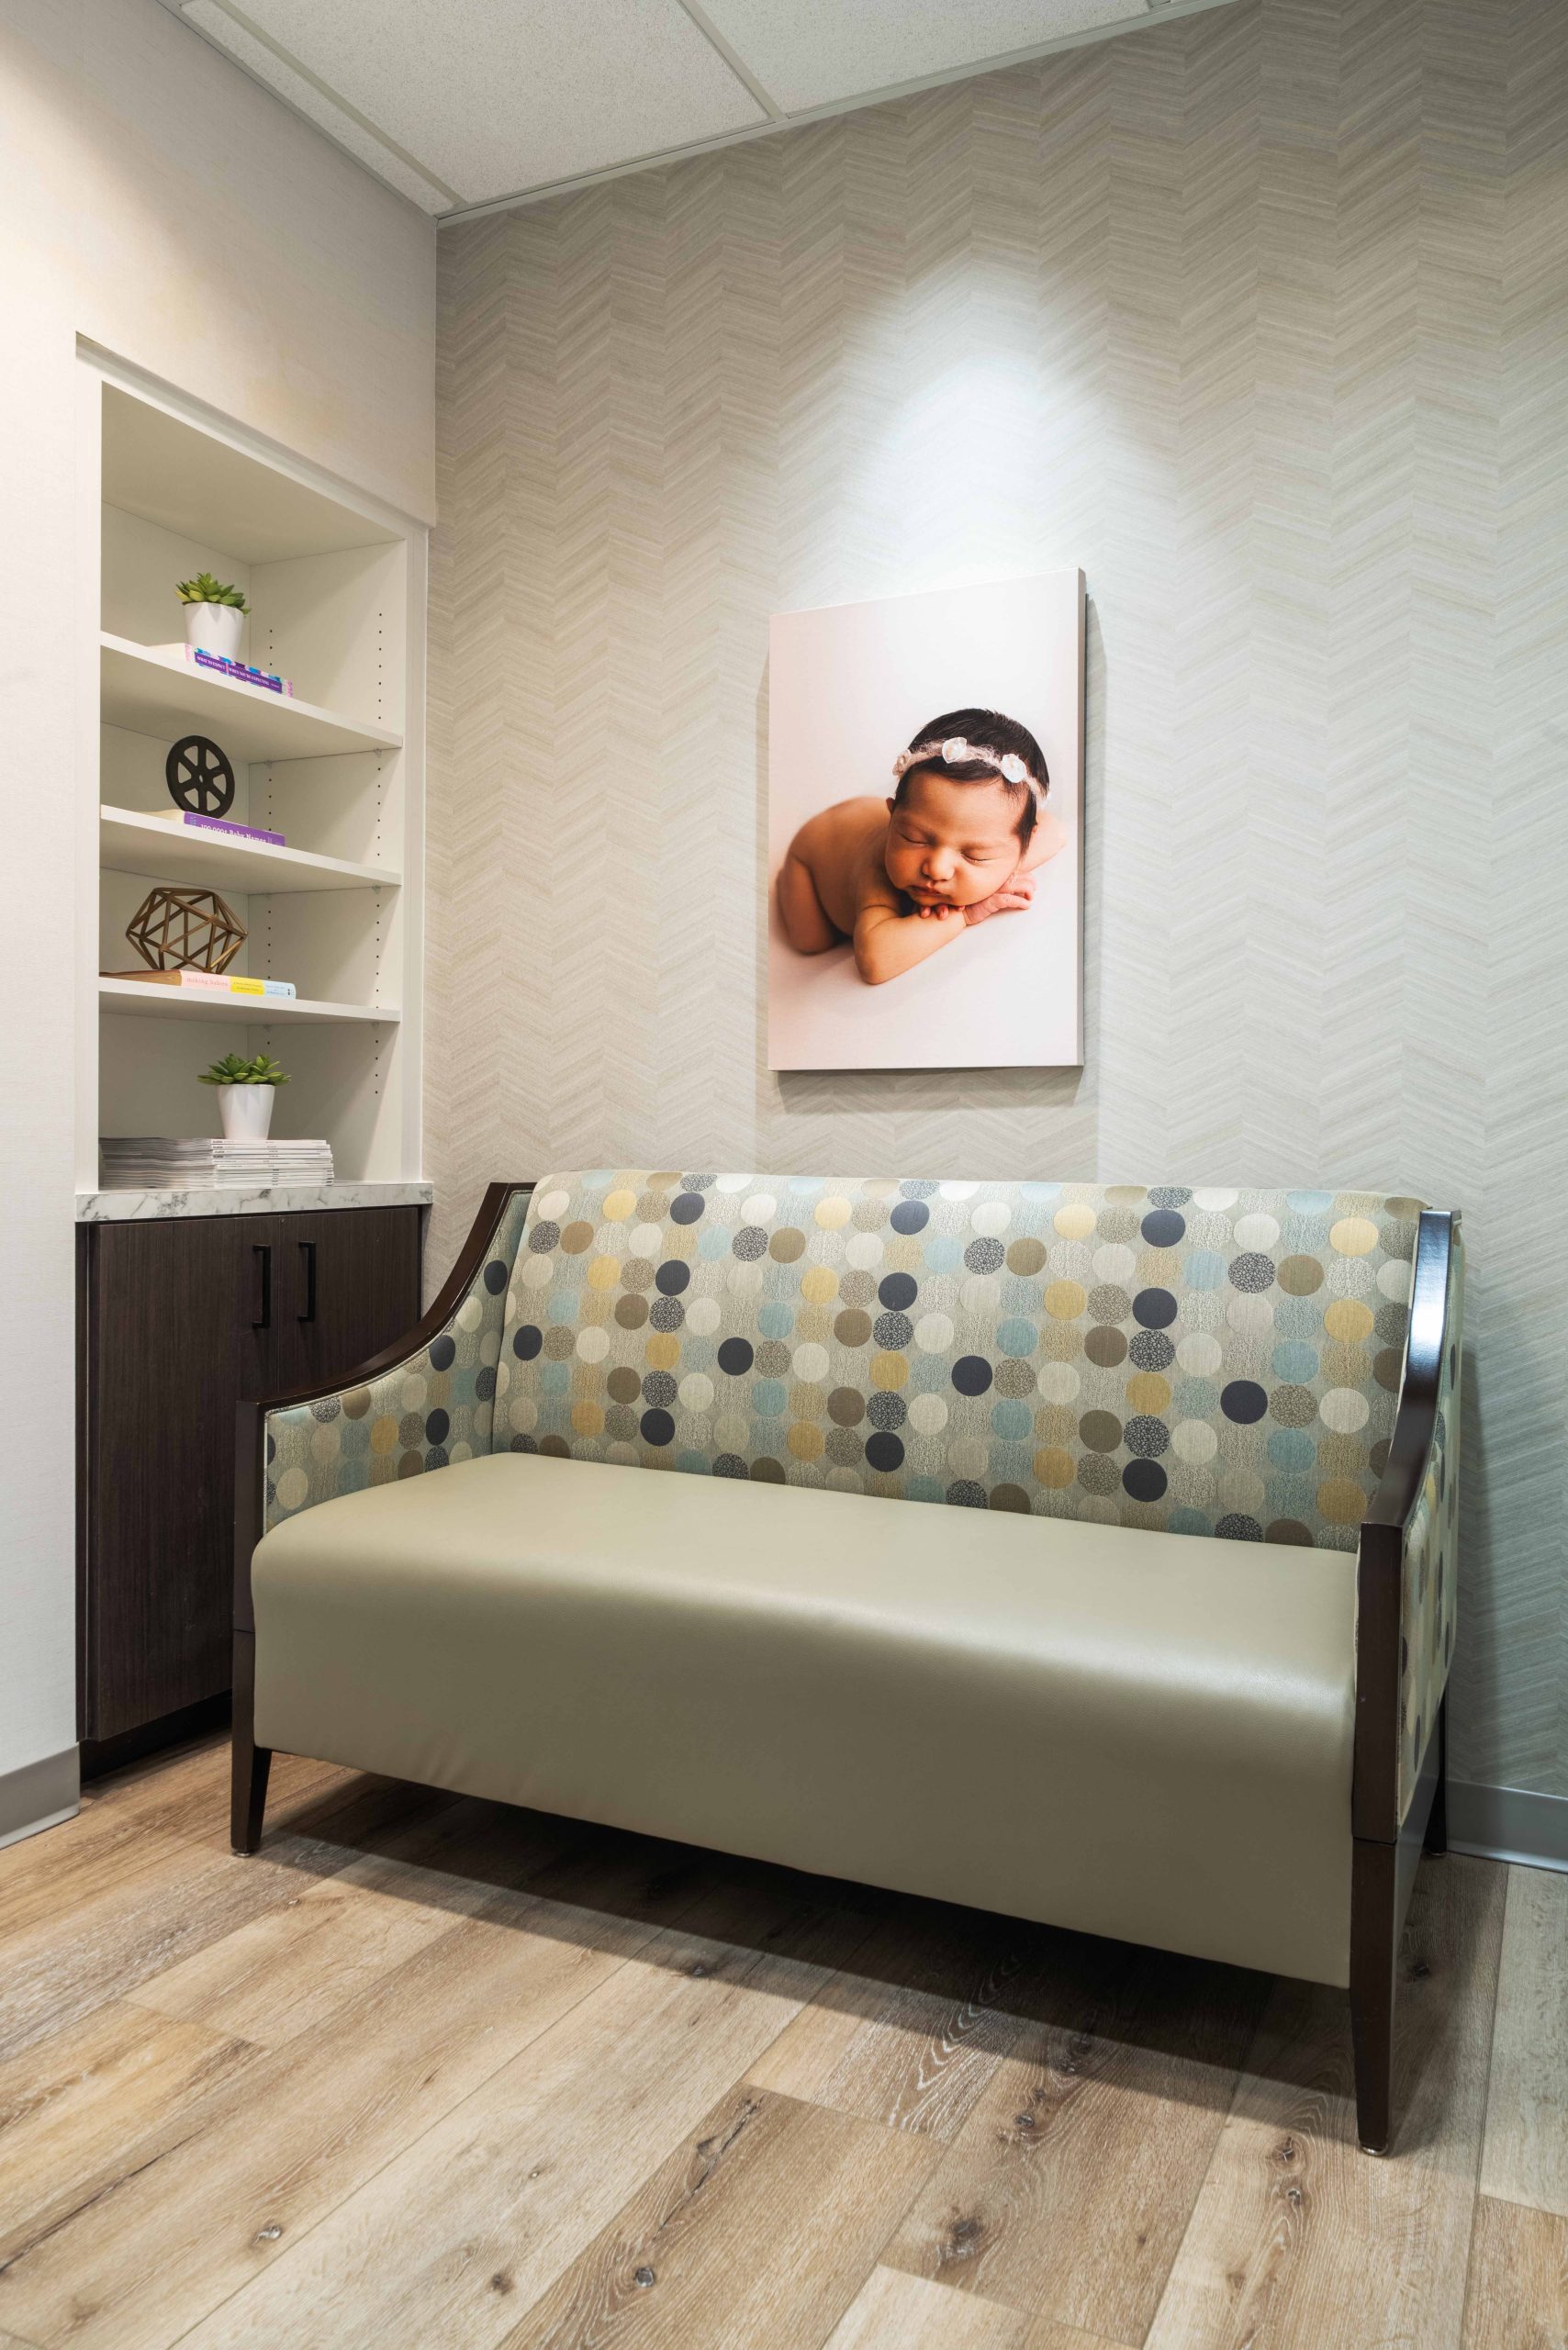 OBGYN office waiting room with a couch and hanging canvas photo of a baby girl with a flower crown